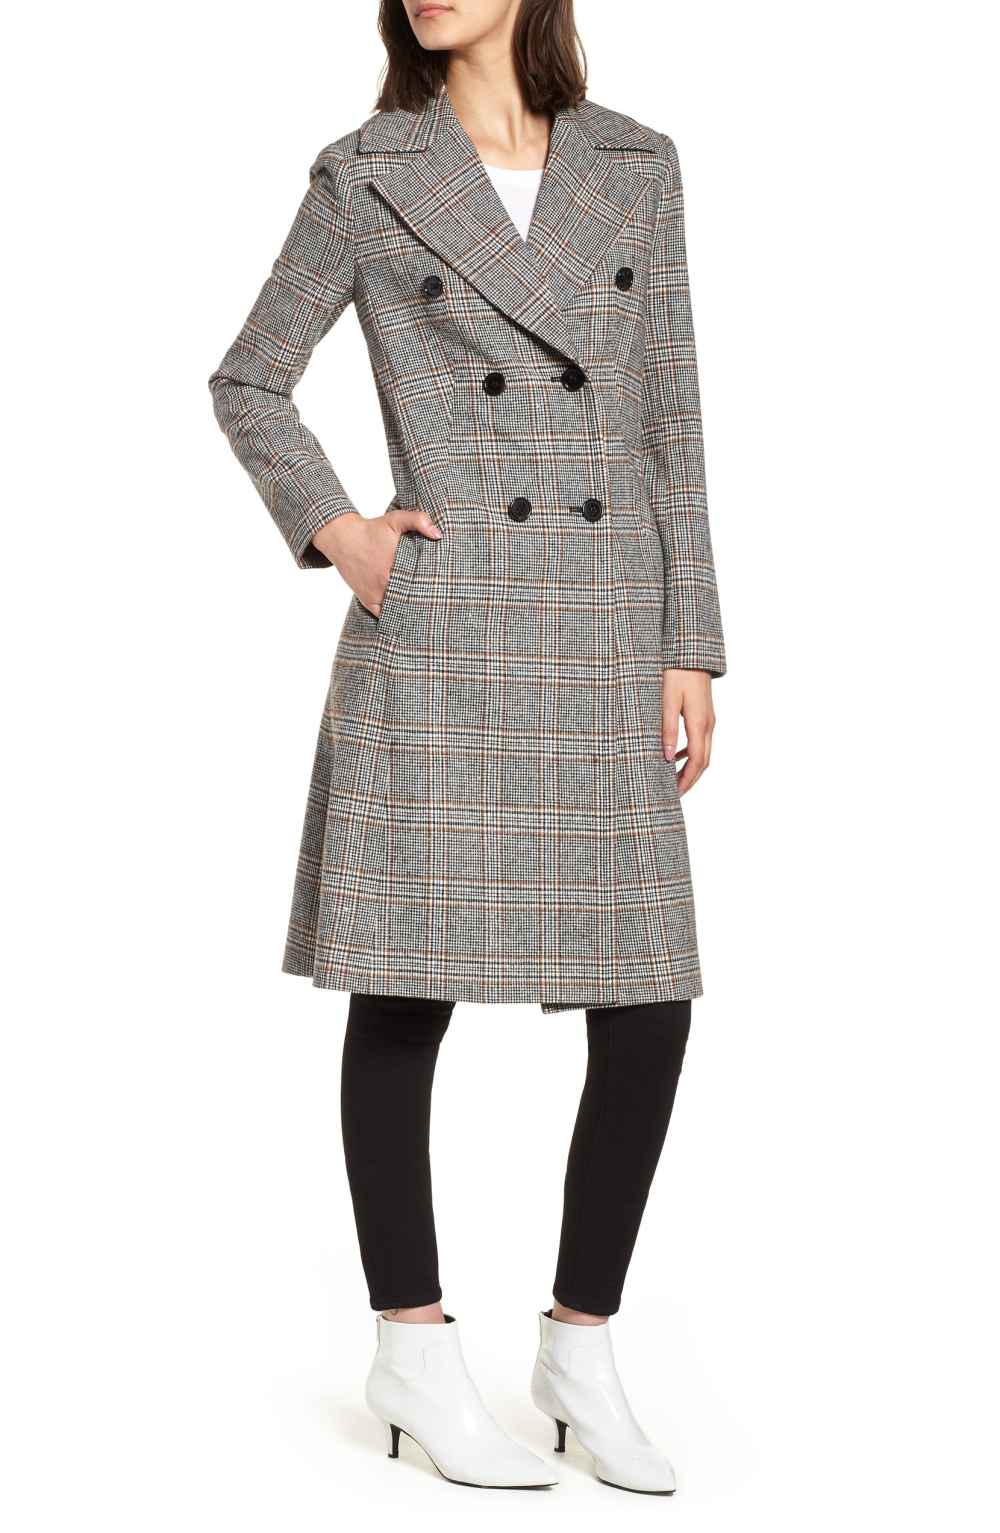 Complete Your Fall Looks With This Plaid Blazer Coat | Us Weekly